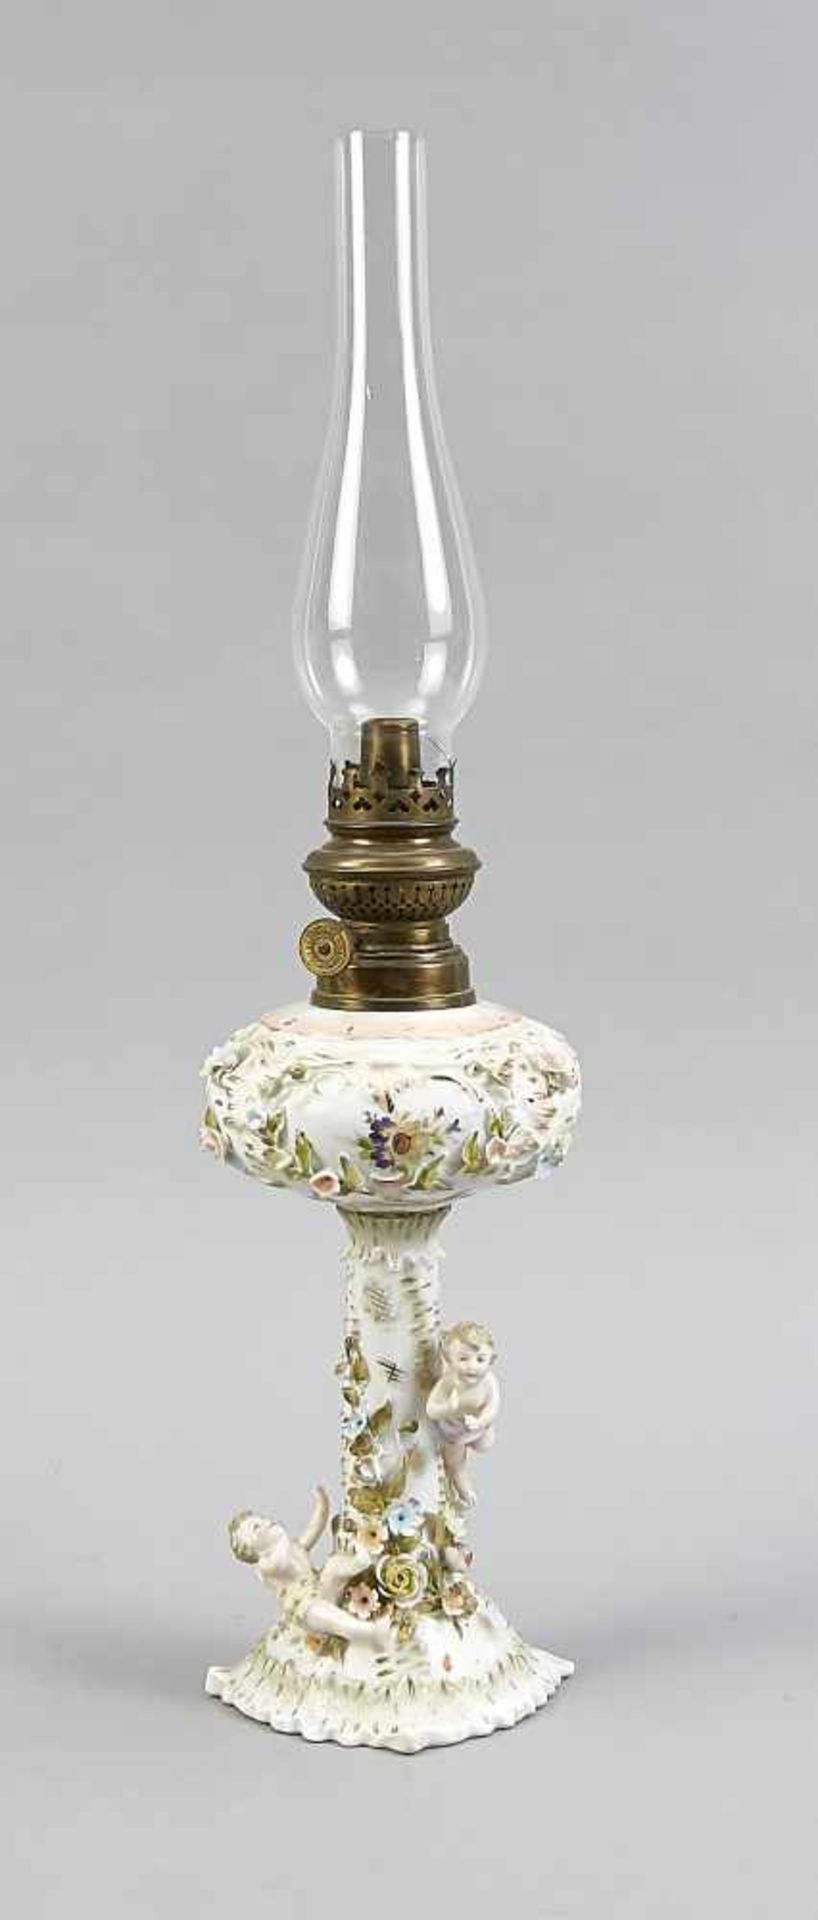 Kerosene lamp, pres. Thuringia, around 1990, round foot in spherical body, decorated with